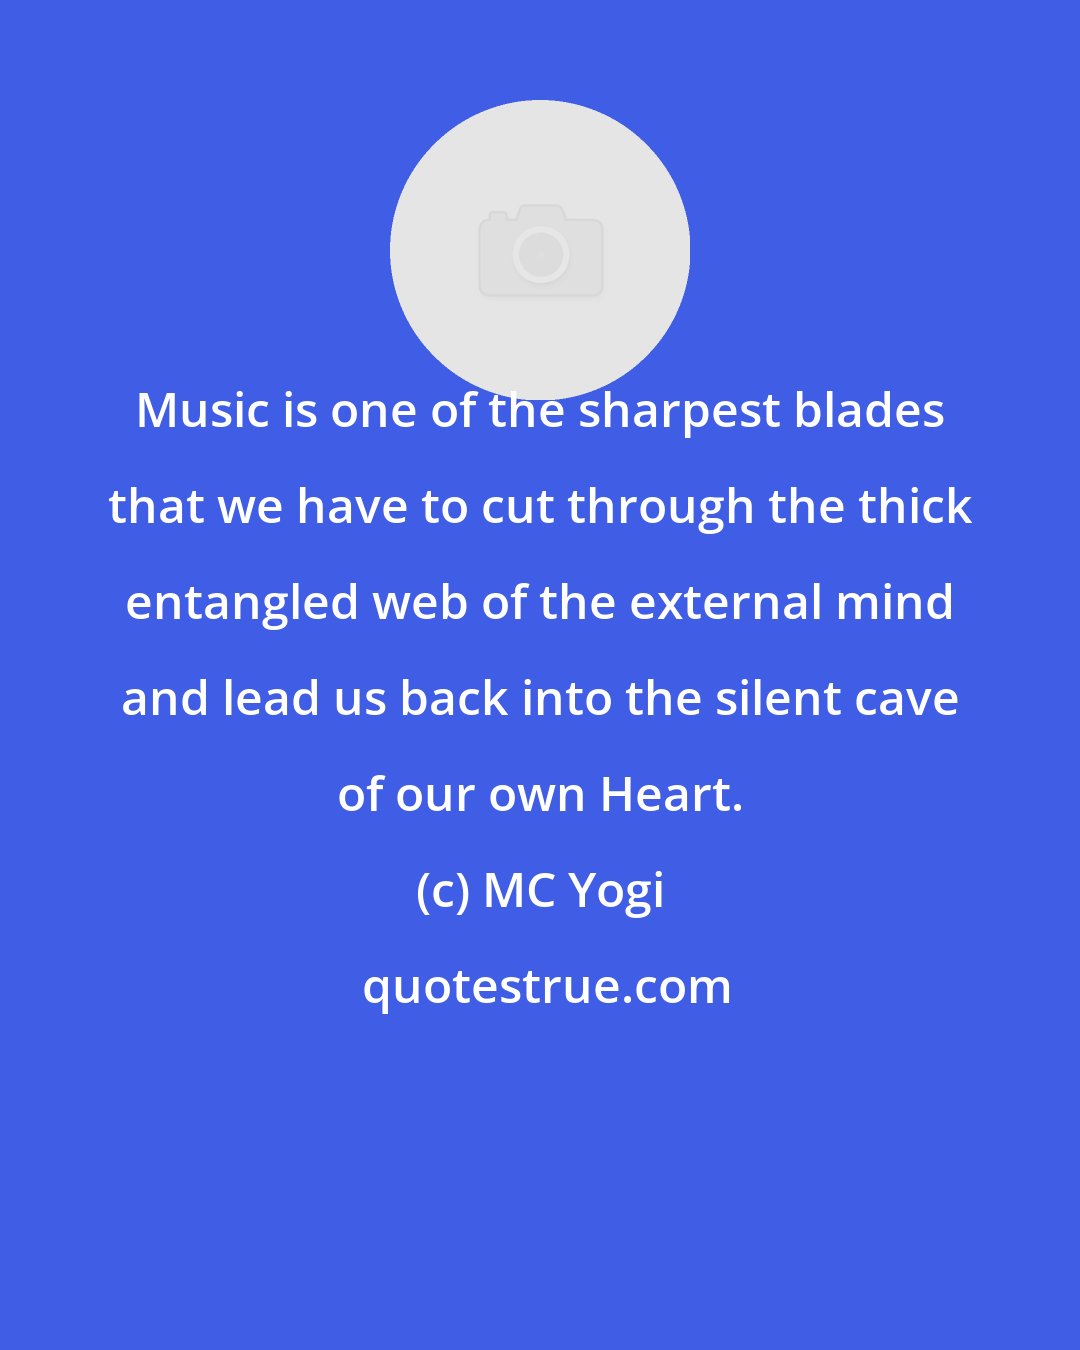 MC Yogi: Music is one of the sharpest blades that we have to cut through the thick entangled web of the external mind and lead us back into the silent cave of our own Heart.